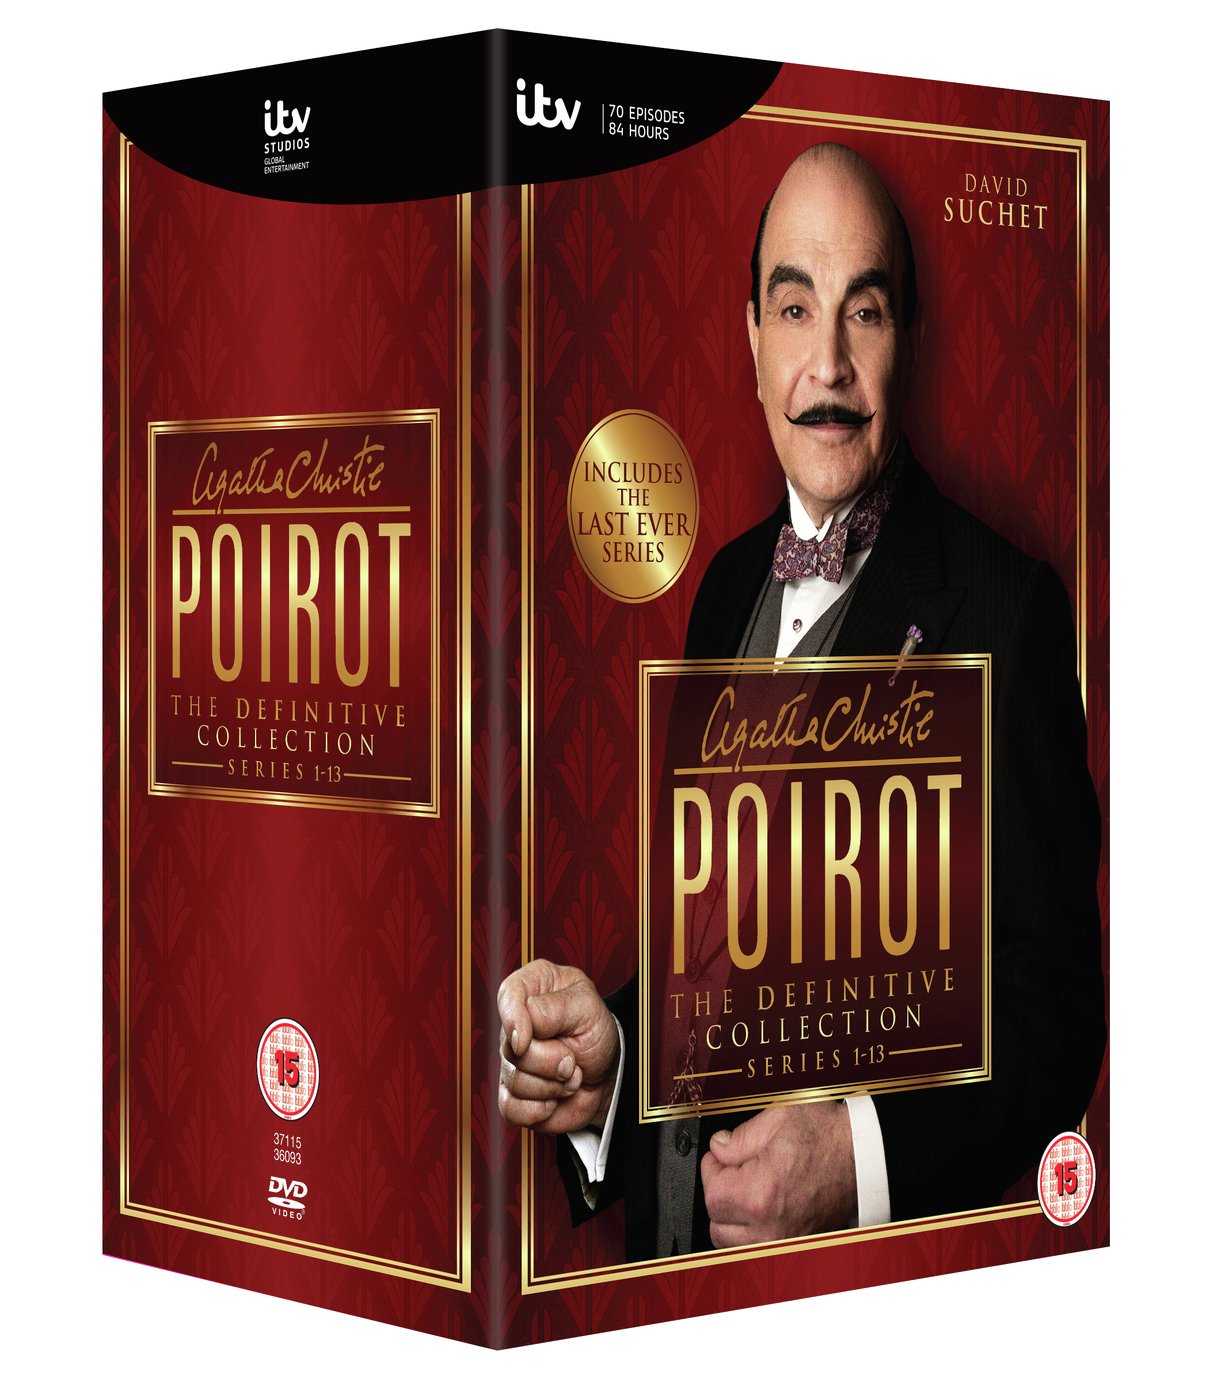 Poirot: The Definitive Collection DVD Box Set